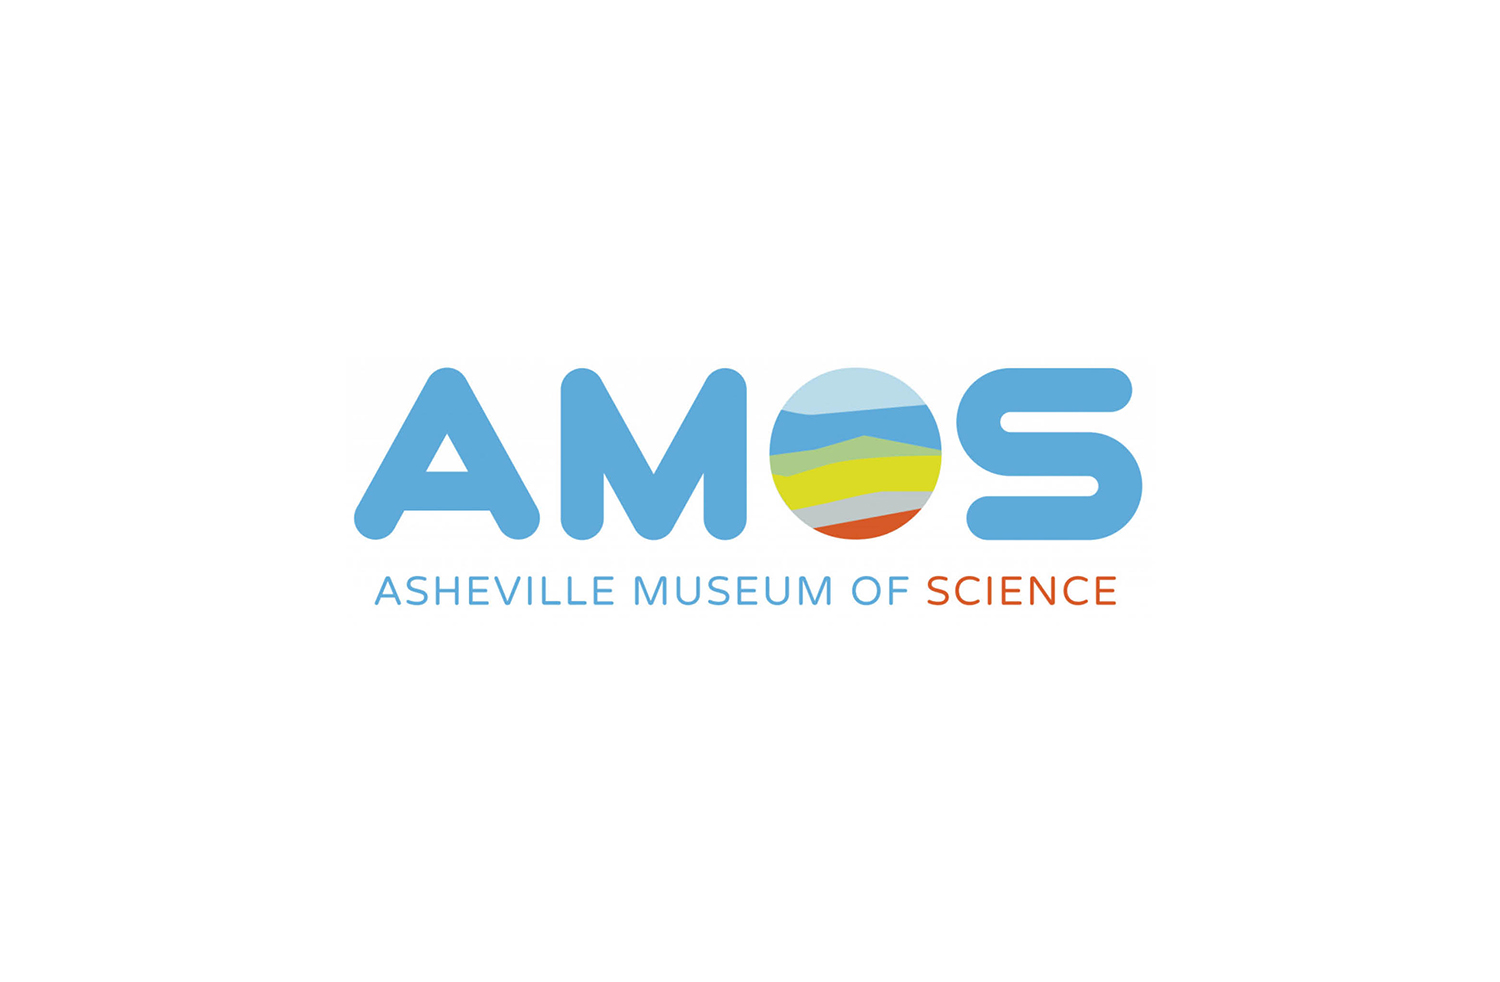 Boss_Display_Client_Asheville_Museum_of_Science_Logo.jpg